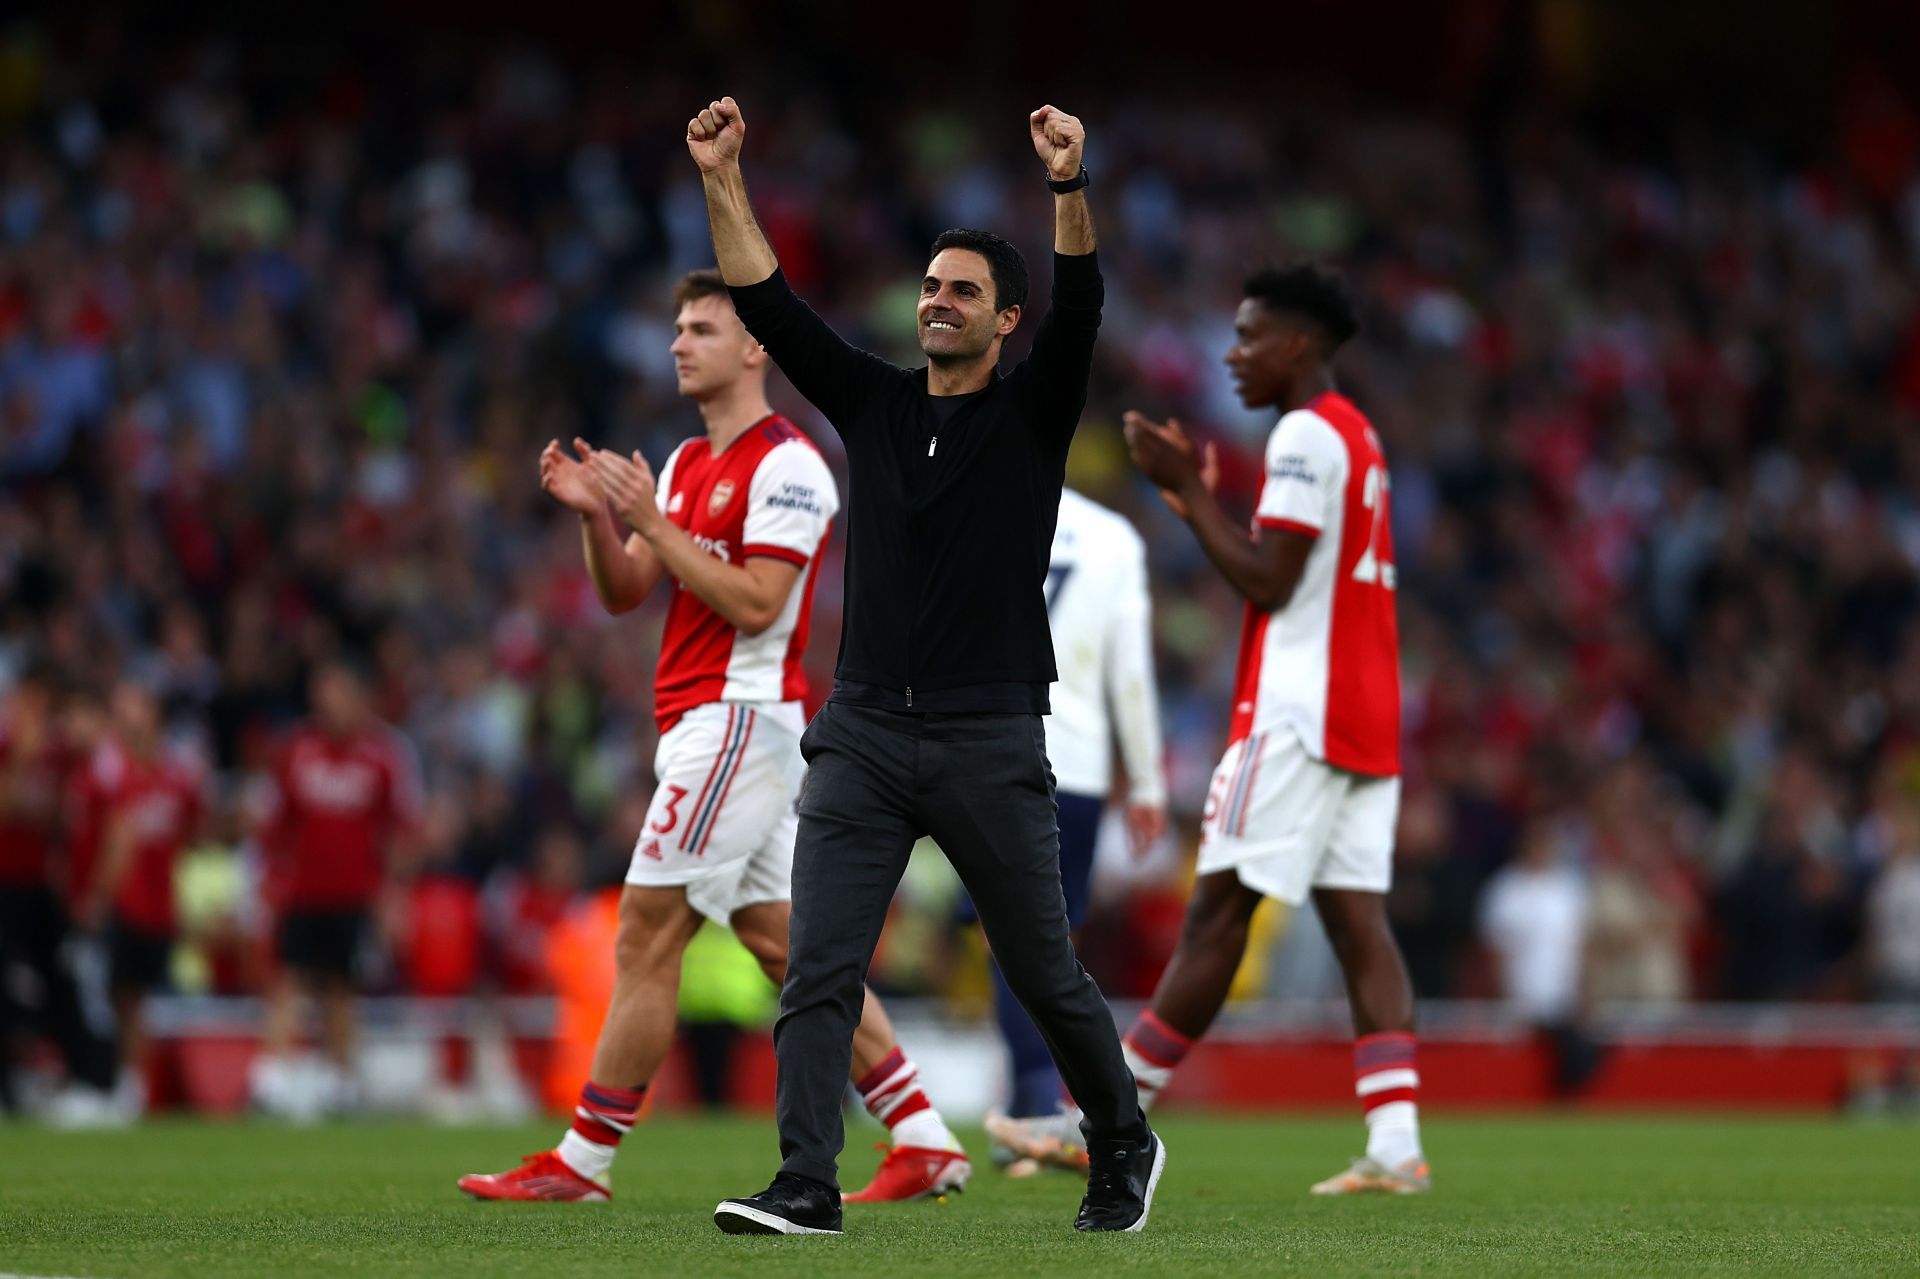 Arsenal manager Mikel Arteta has overseen a turn in fortunes at the Emirates.